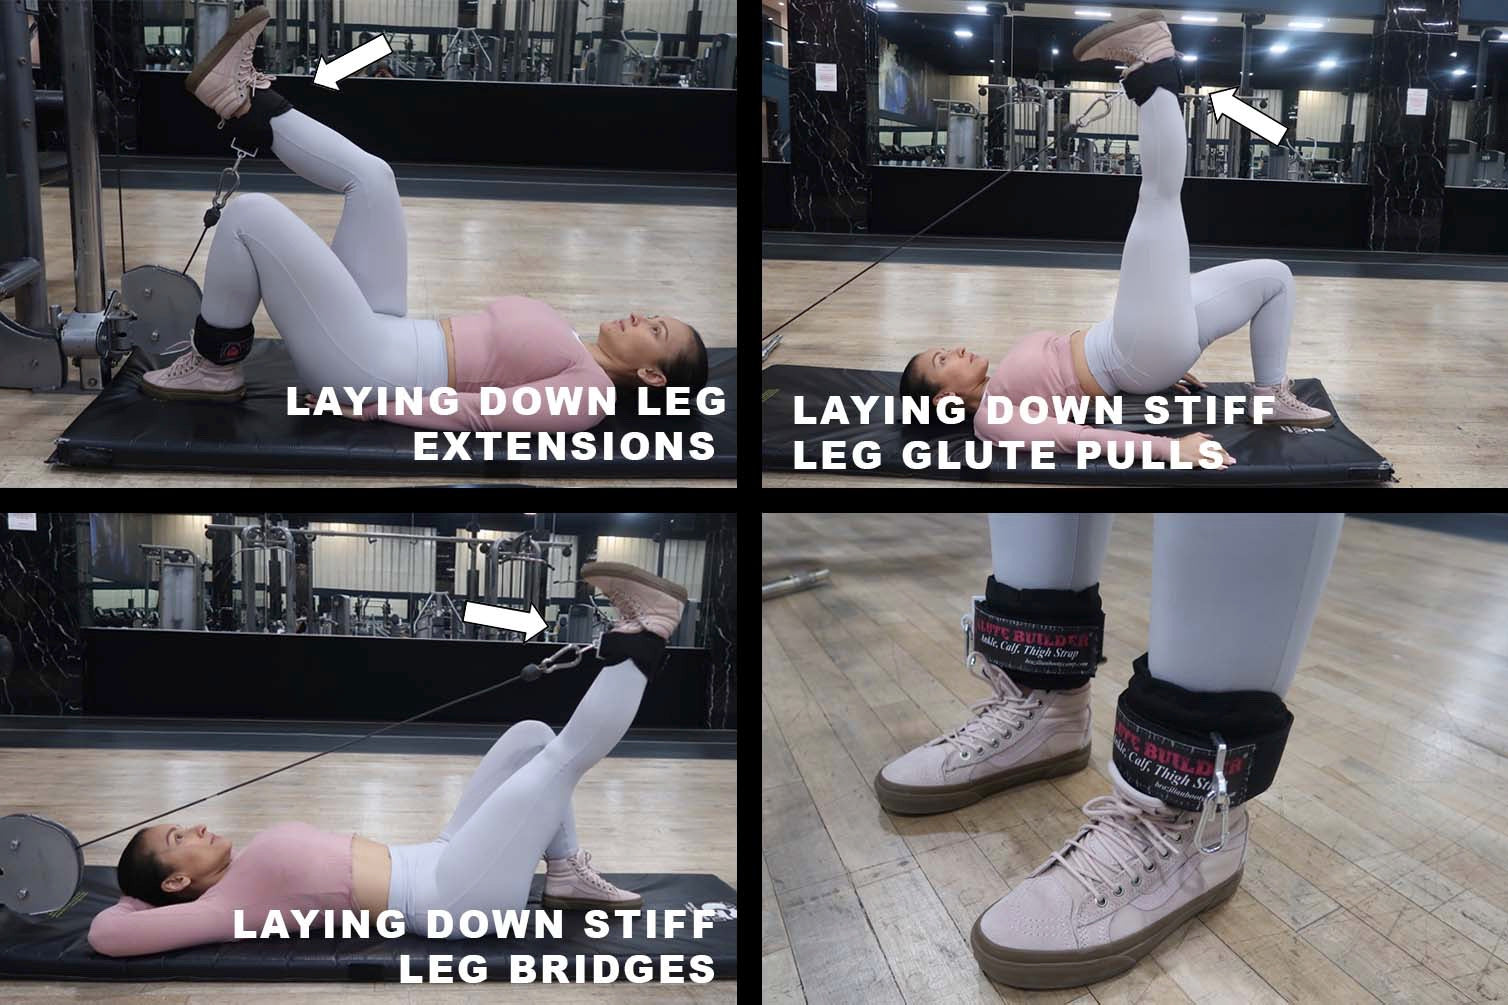 Glute Builder (Ankle, Calf, Thigh Strap) + FREE MOTIVATIONAL WRISTBAND